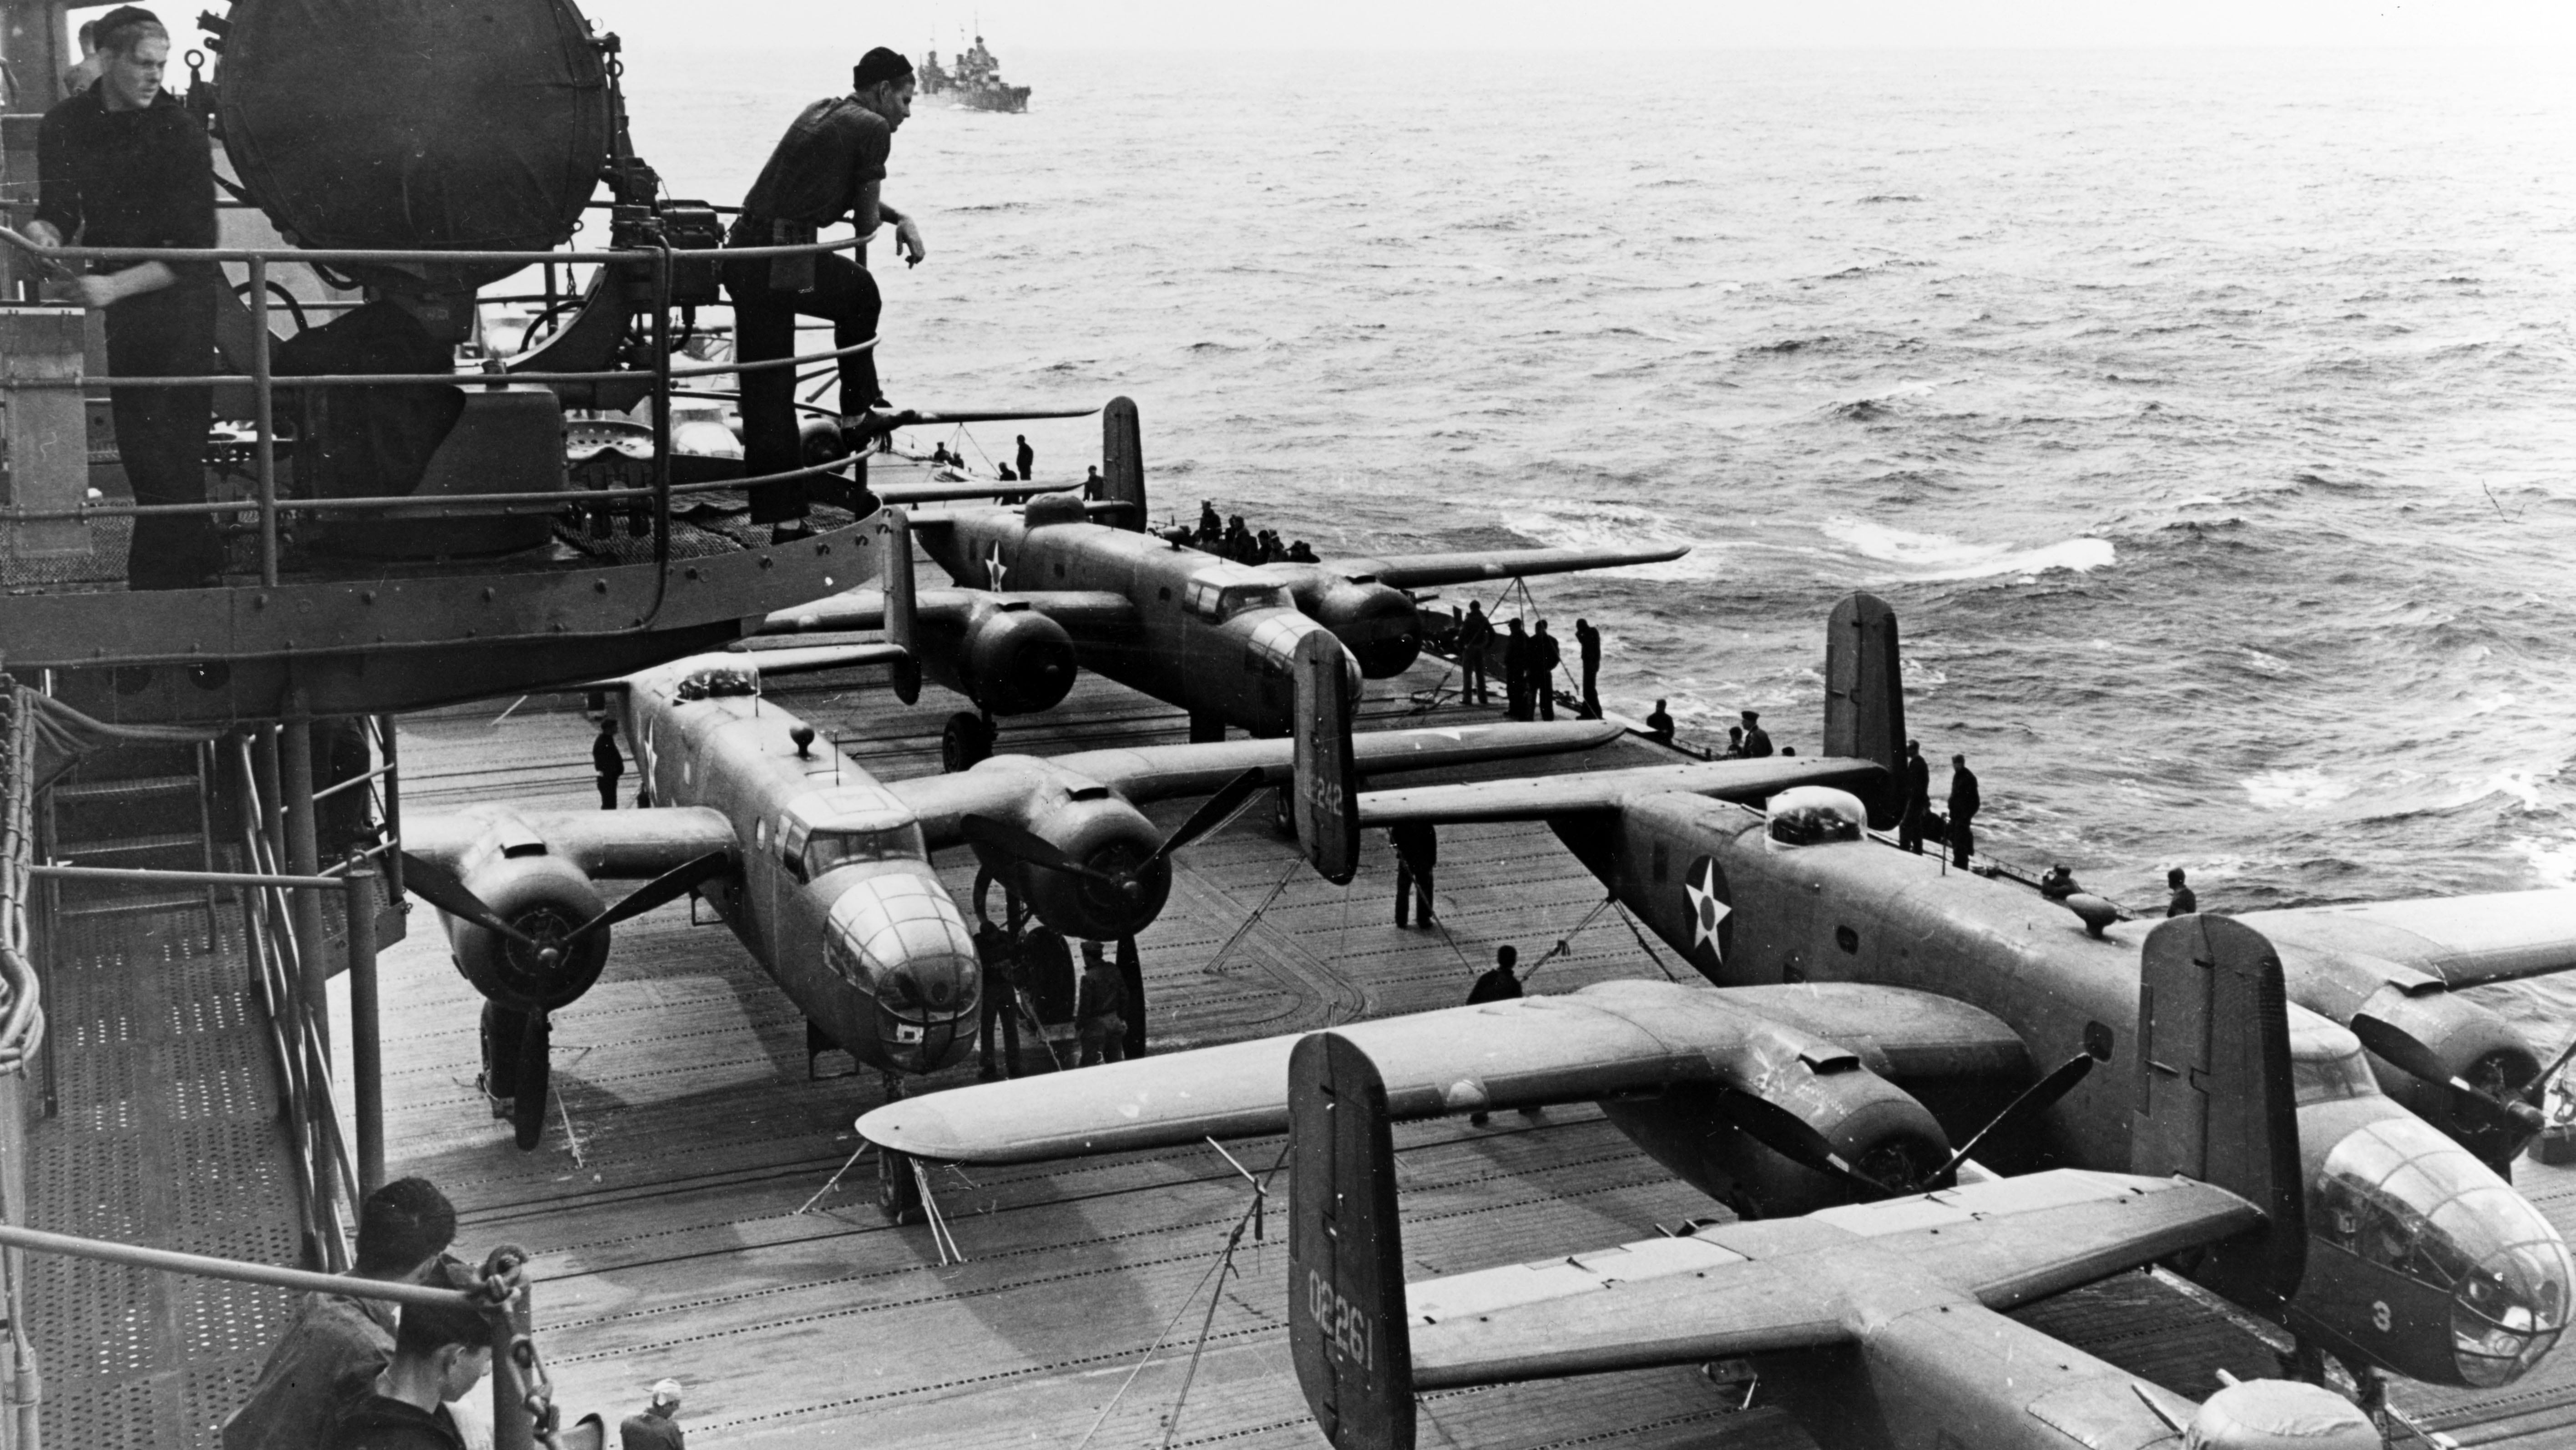 U.S. Army bombers crowd the deck of the aircraft carrier Hornet, as a U.S. Navy task force steams across the north Pacific on a mission to avenge the December 7, 1941 Japanese attack on Pearl Harbor. (photo credit: National Archives)